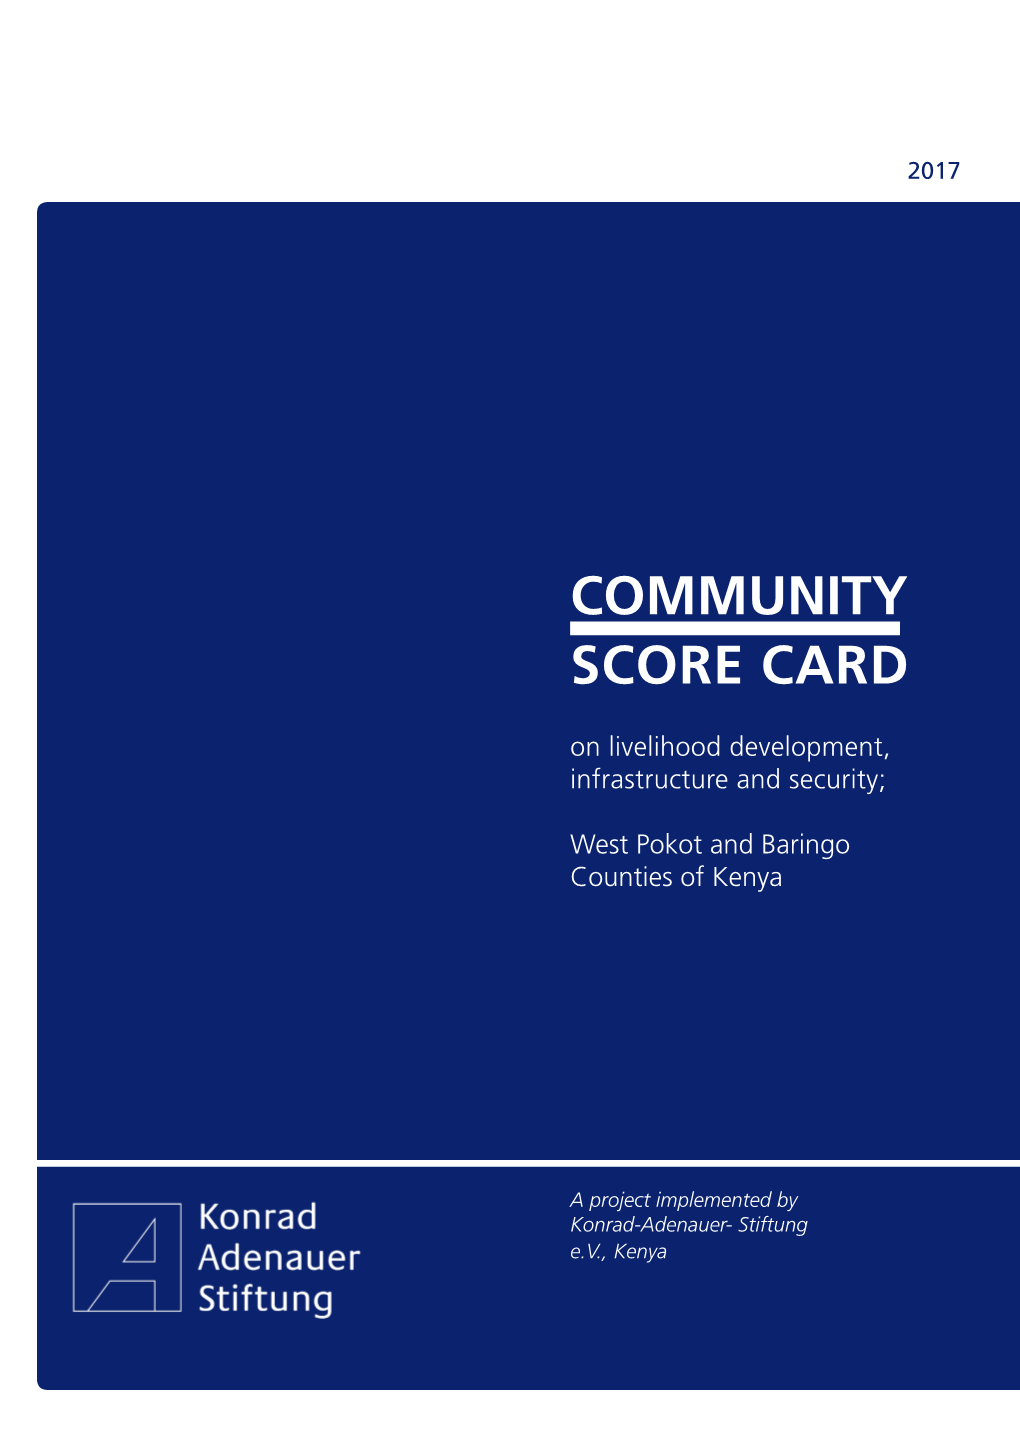 Community Score Card on Livelihood Development, Infrastructure and Security;